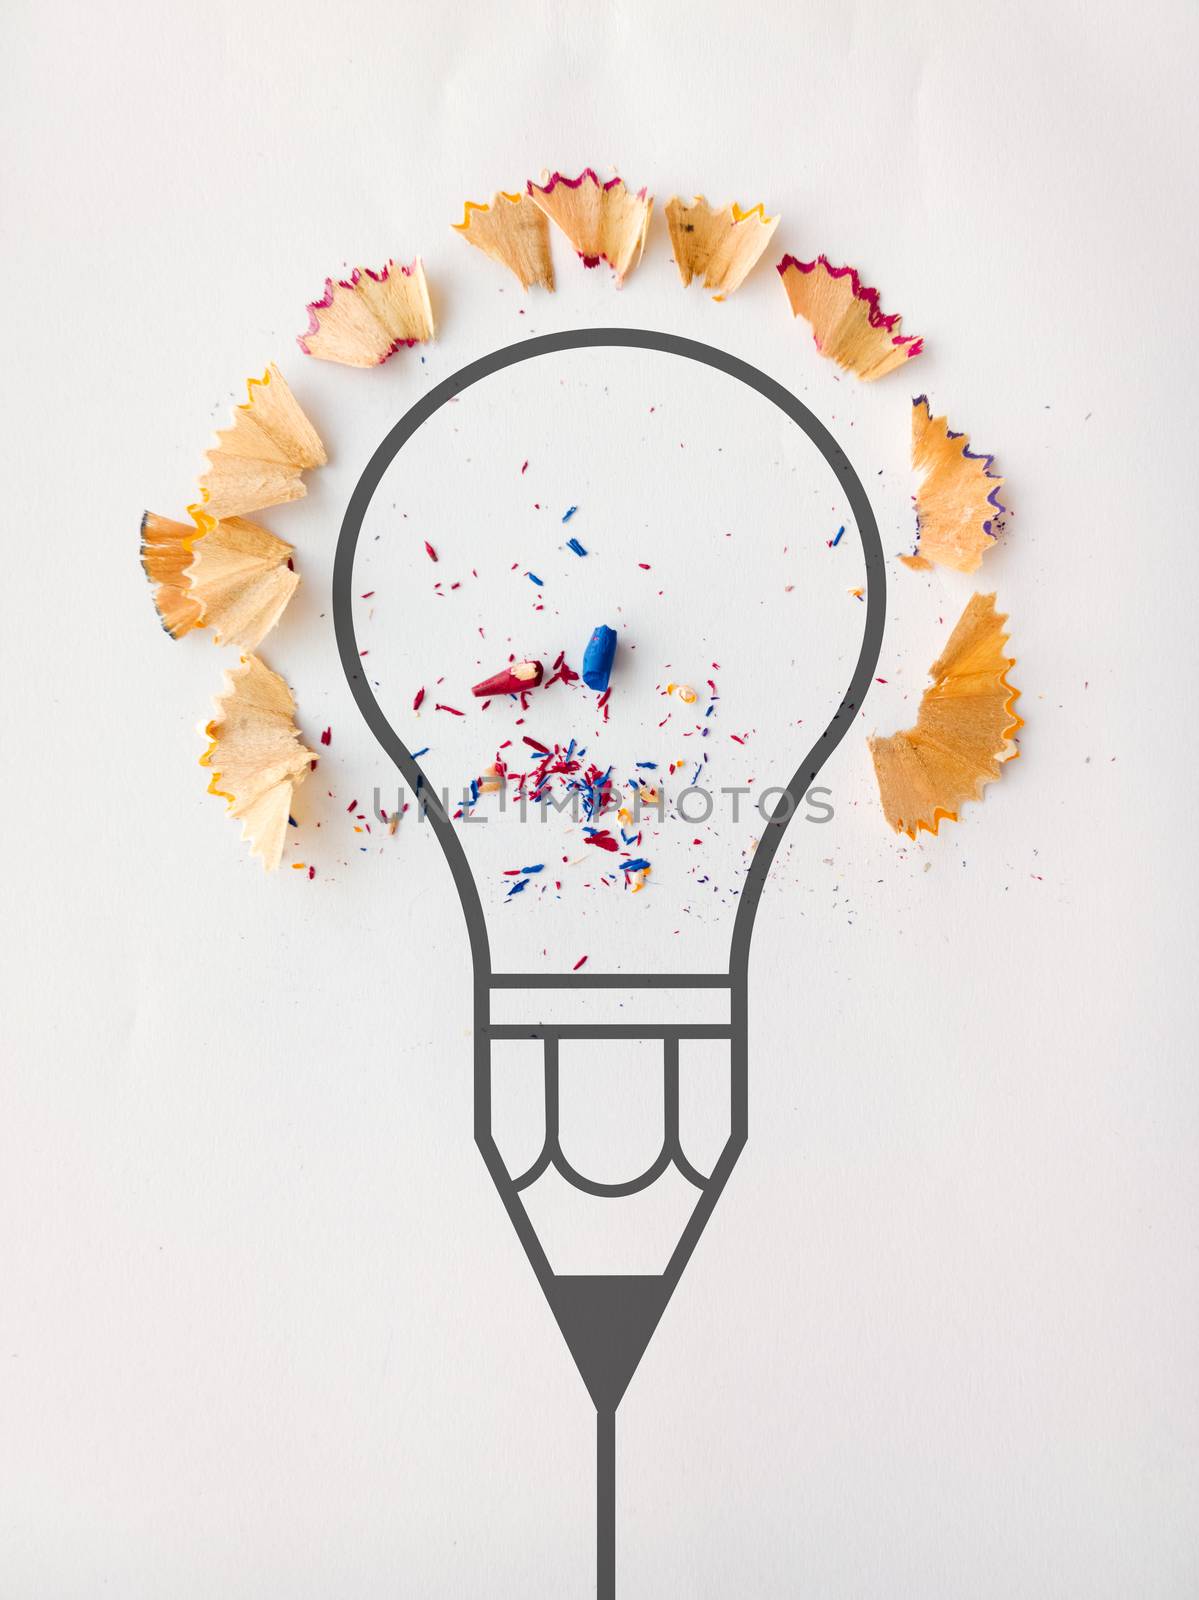 graphic pencil  light bulb with pencil saw dust on paper background as creative concept